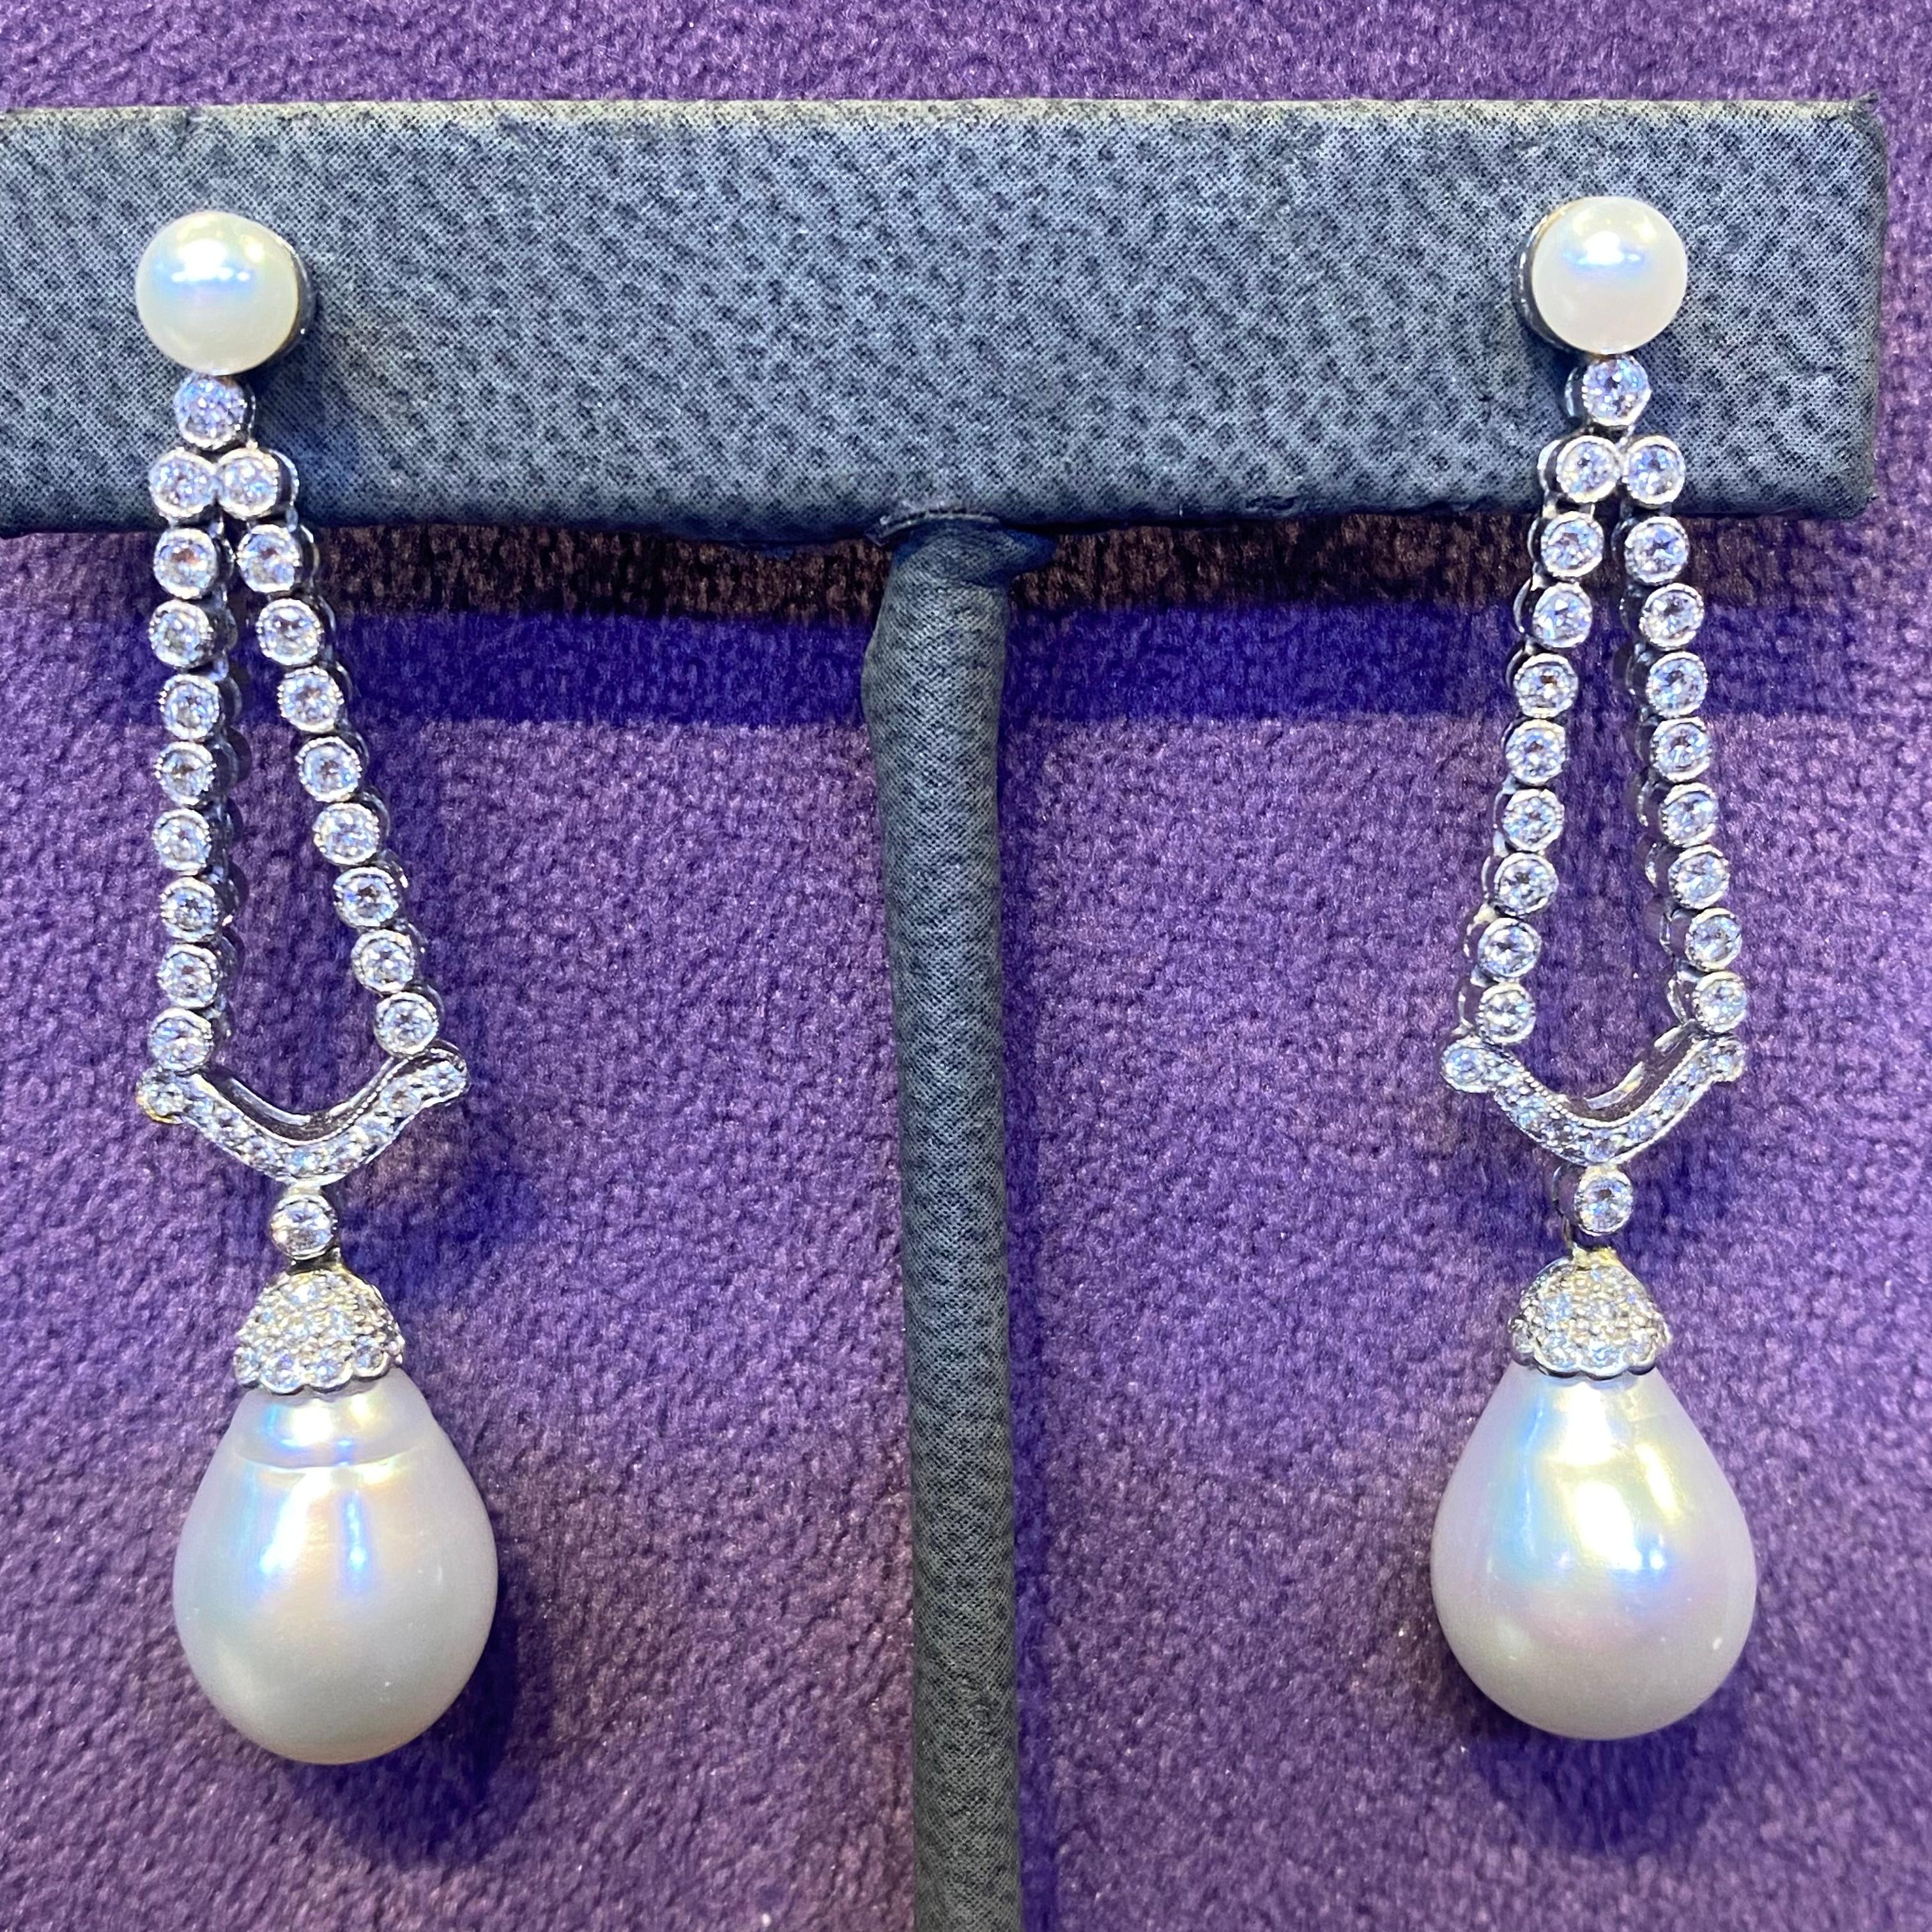 Pearl & Diamond Earrings

Earrings featuring two cultured pearls set with two rows of cascading rounds cut diamonds, with two larger south sea pearls elegantly dangling below.

Large pearl measurements: 13.9x 11.66mm

Diamond Weight: approximately